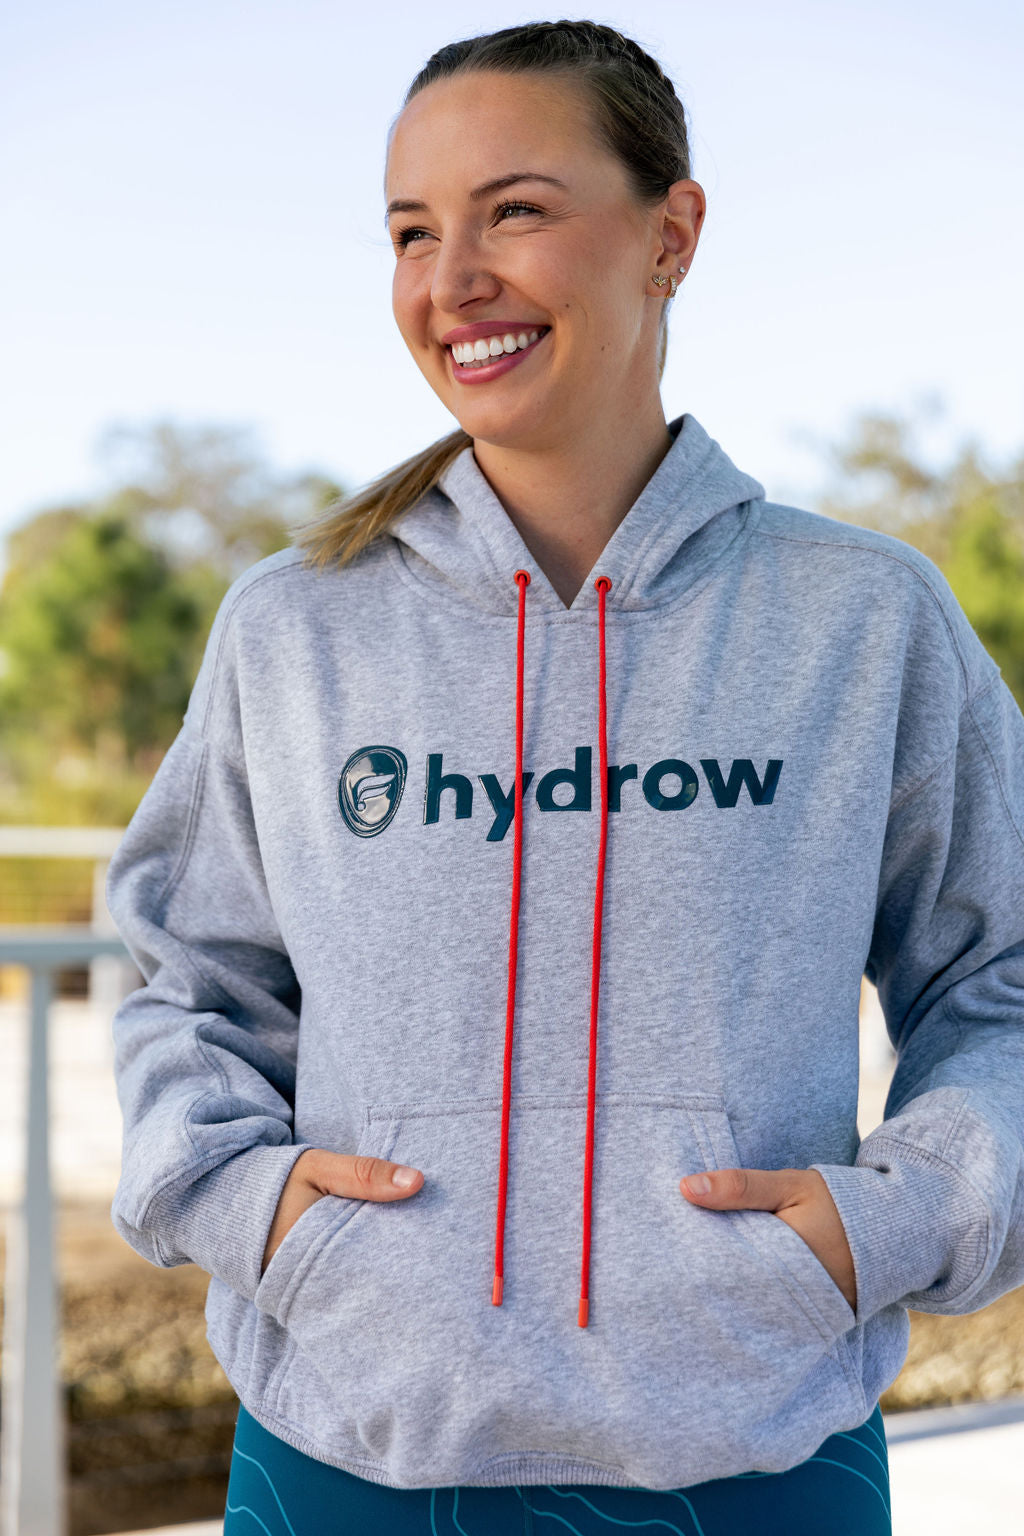 hydrow athlete wearing the forever fleece hoodie with hydrow fabletics logo on center chest